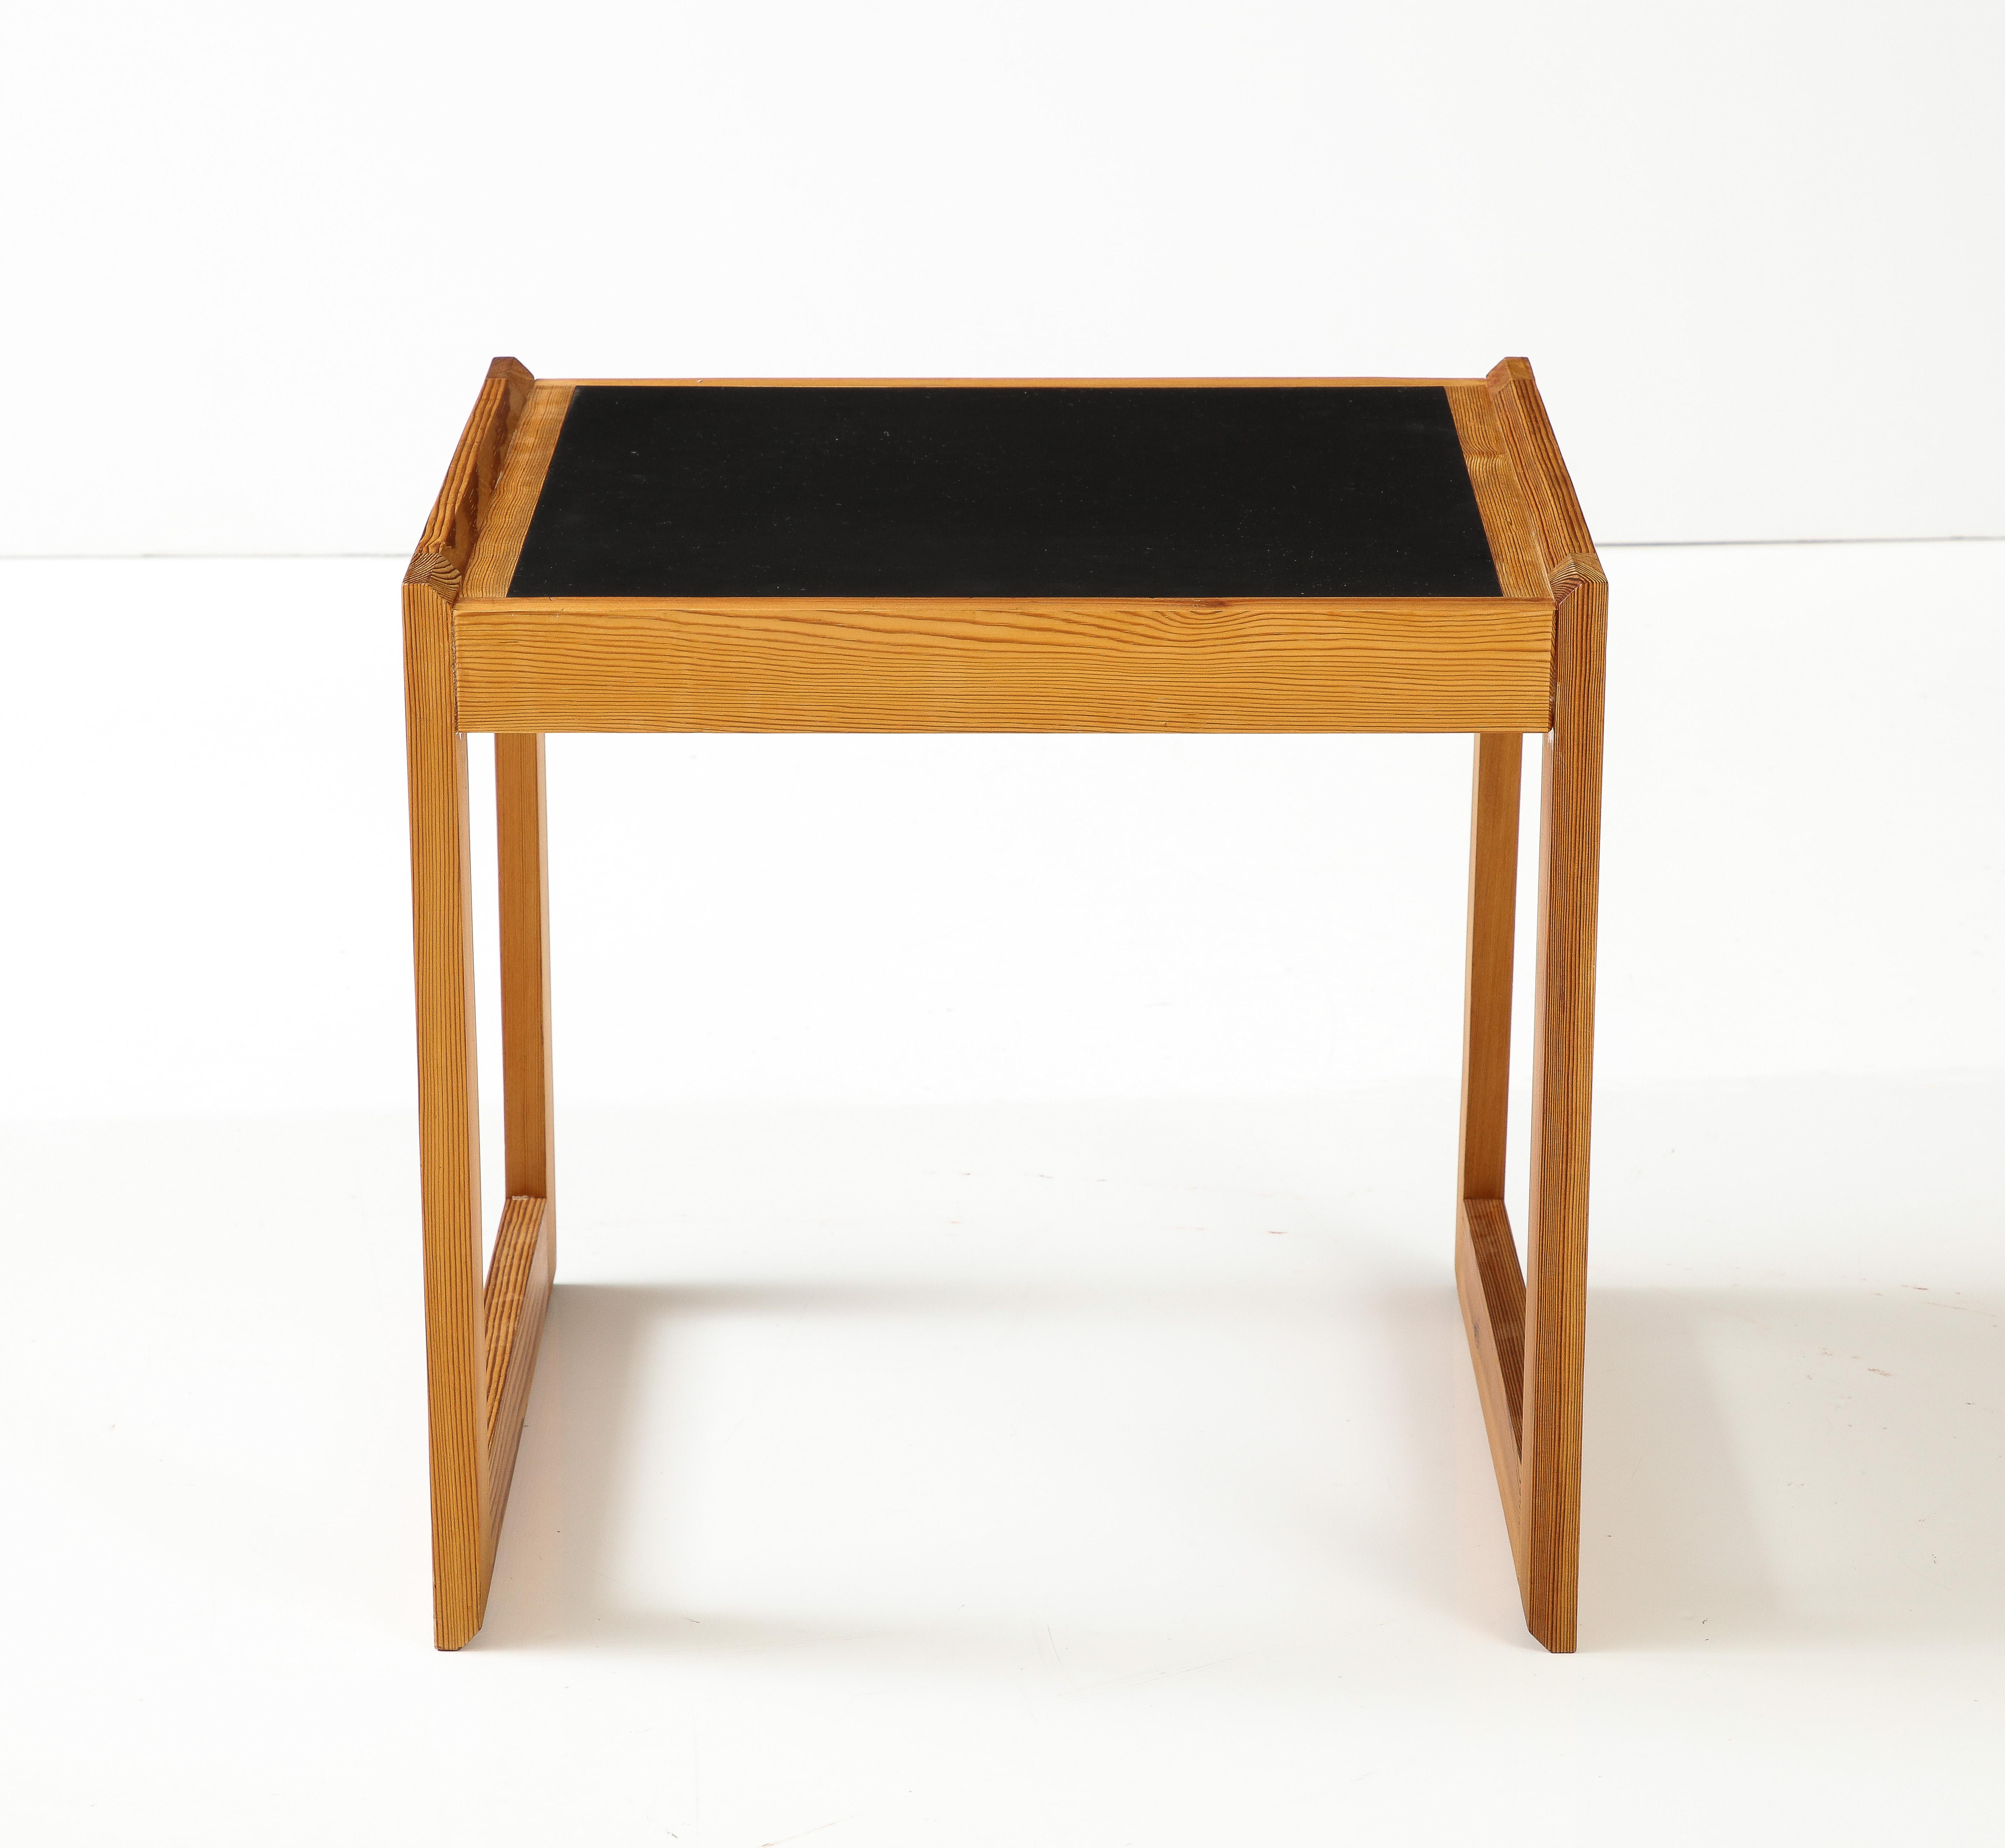 A pair of Danish pine and laminate side tables, attributed to Bernt Petersen, circa 1960s, the black laminate tops with a pine raised edge raised on a box form support. Old nicks in tops but overall a good feel. The pine has a great mellow patina.